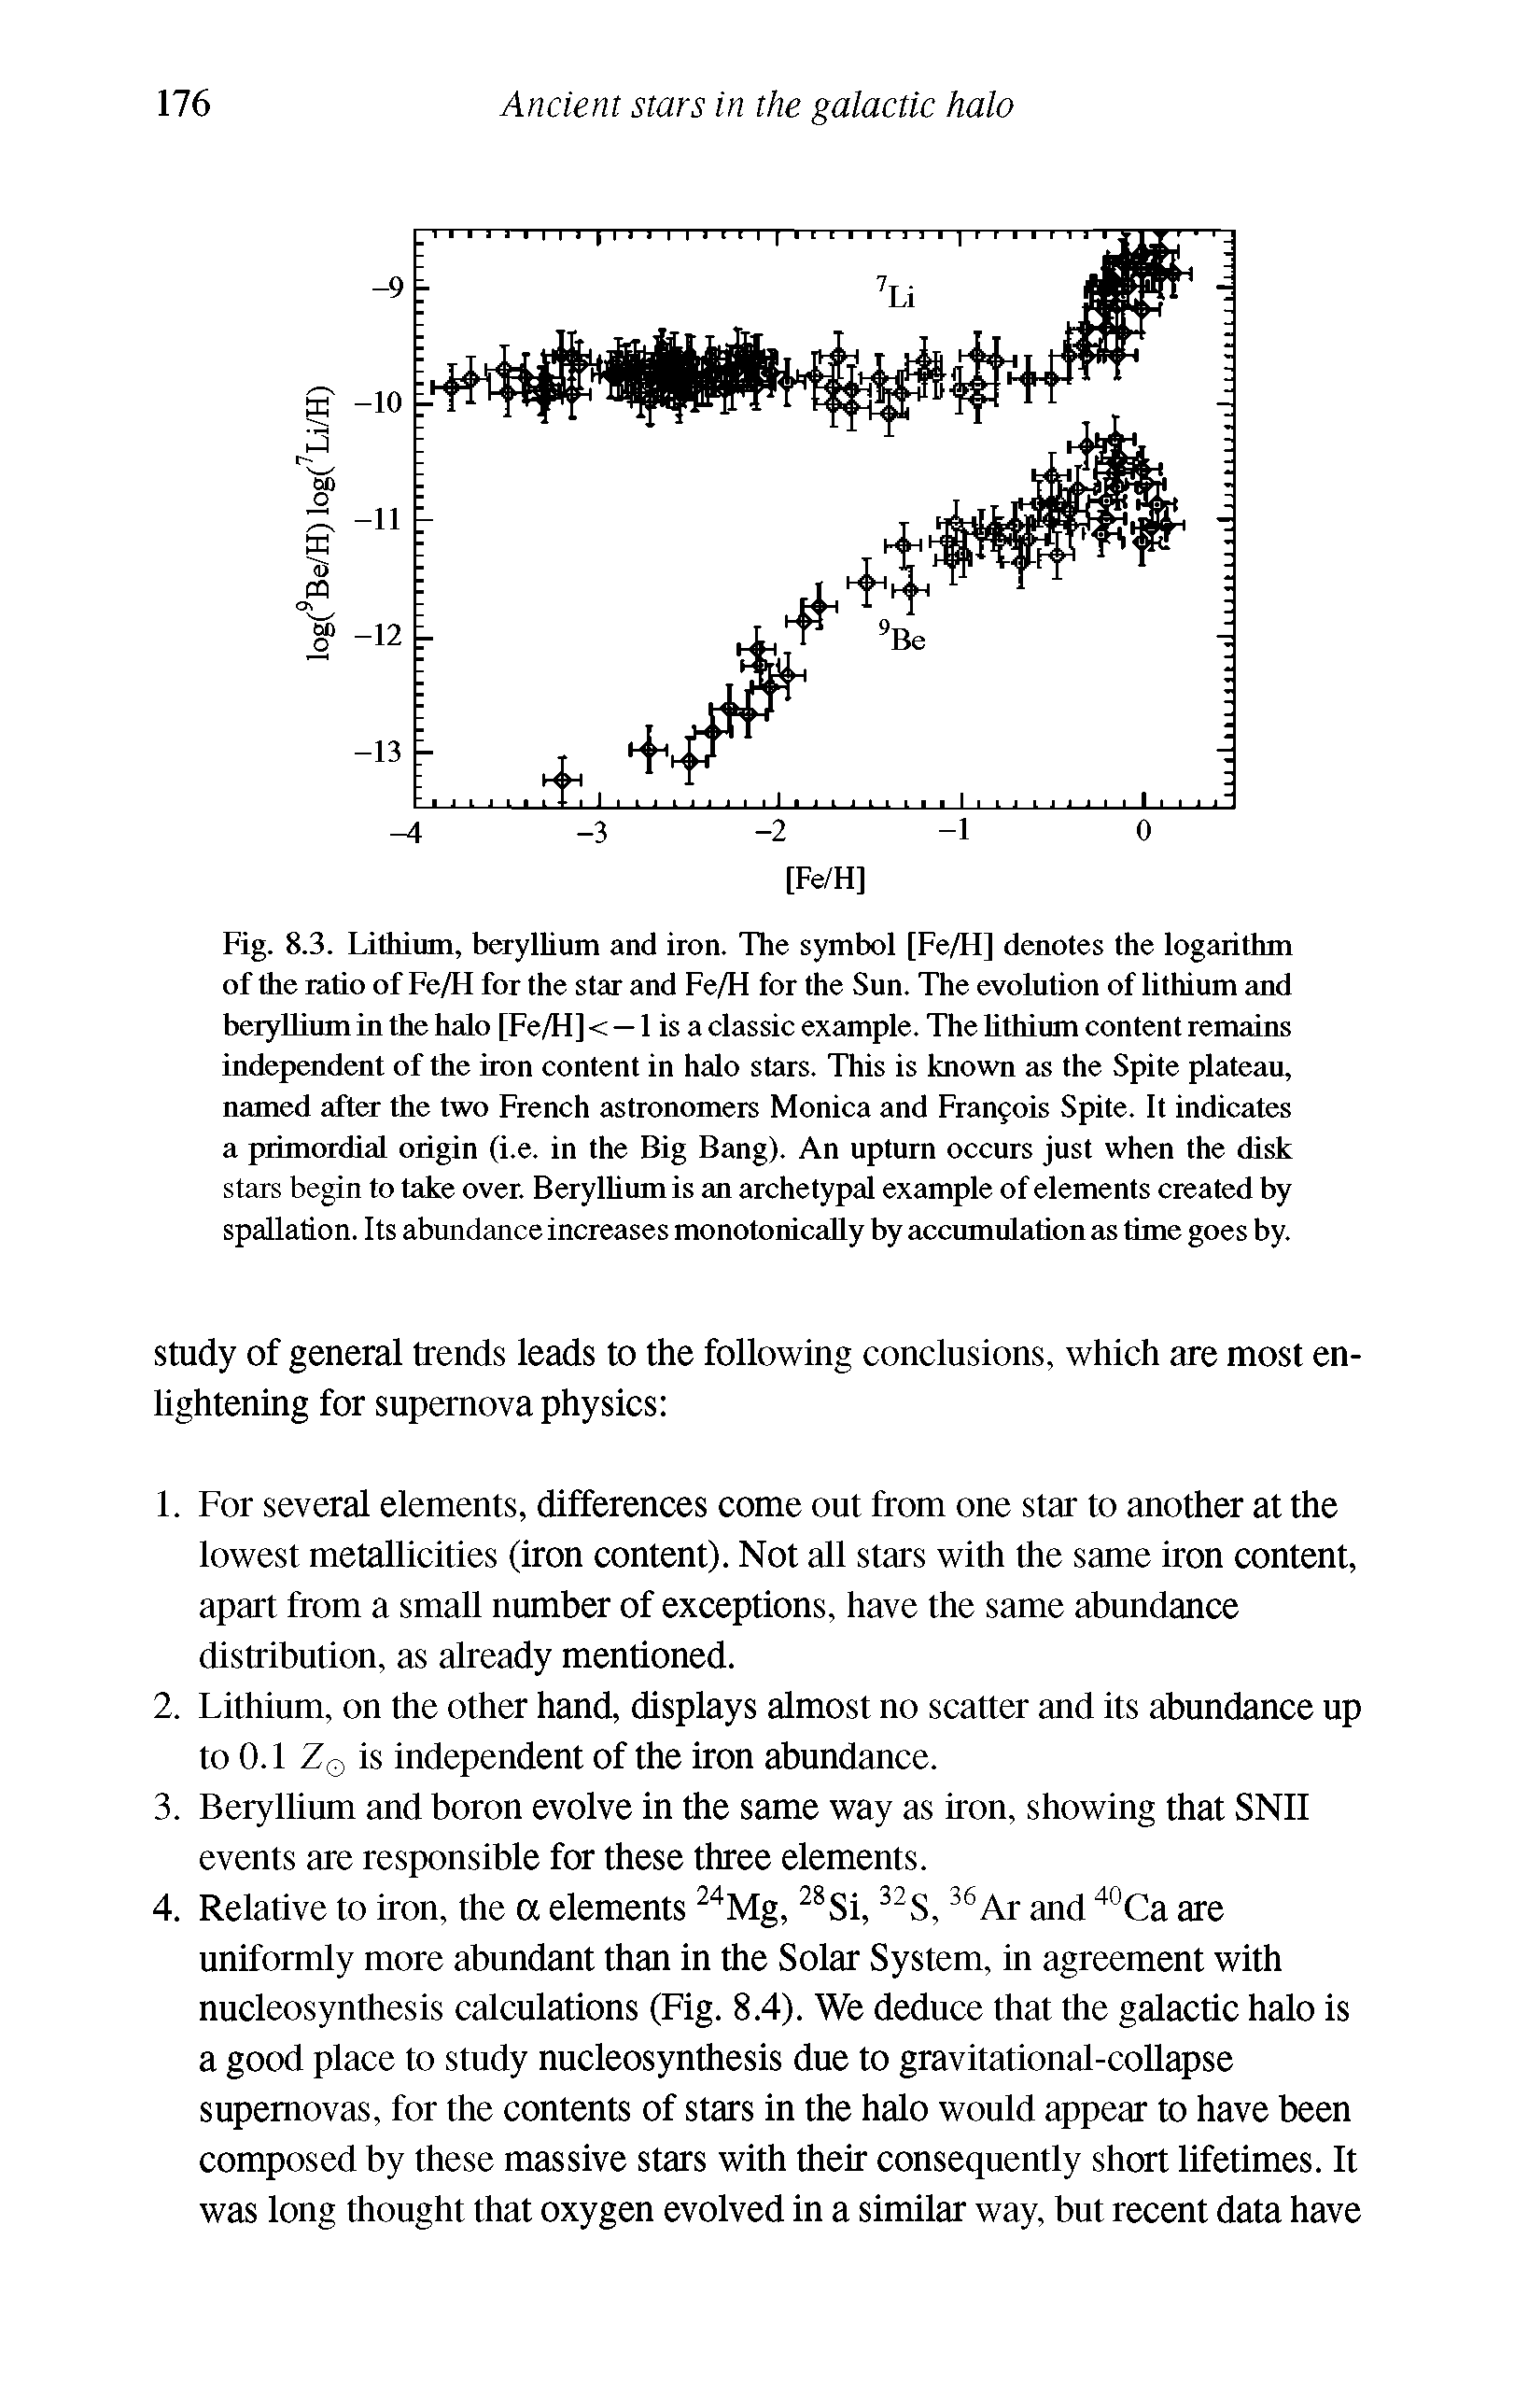 Fig. 8.3. Lithium, beryllium and iron. The symbol [Fe/H] denotes the logarithm of the ratio of Fe/H for the star and Fe/H for the Sun. The evolution of lithium and beryUium in the halo [Fe/H] < — 1 is a classic example. The lithium content remains independent of the iron content in halo stars. This is known as the Spite plateau, named after the two French astronomers Monica and Fran ois Spite. It indicates a primordial origin (i.e. in the Big Bang). An upturn occurs just when the disk stars begin to take over. Berylhumis an archetypal example of elements created by spallation. Its abundance increases monotonicaUy by accumulation as time goes by.